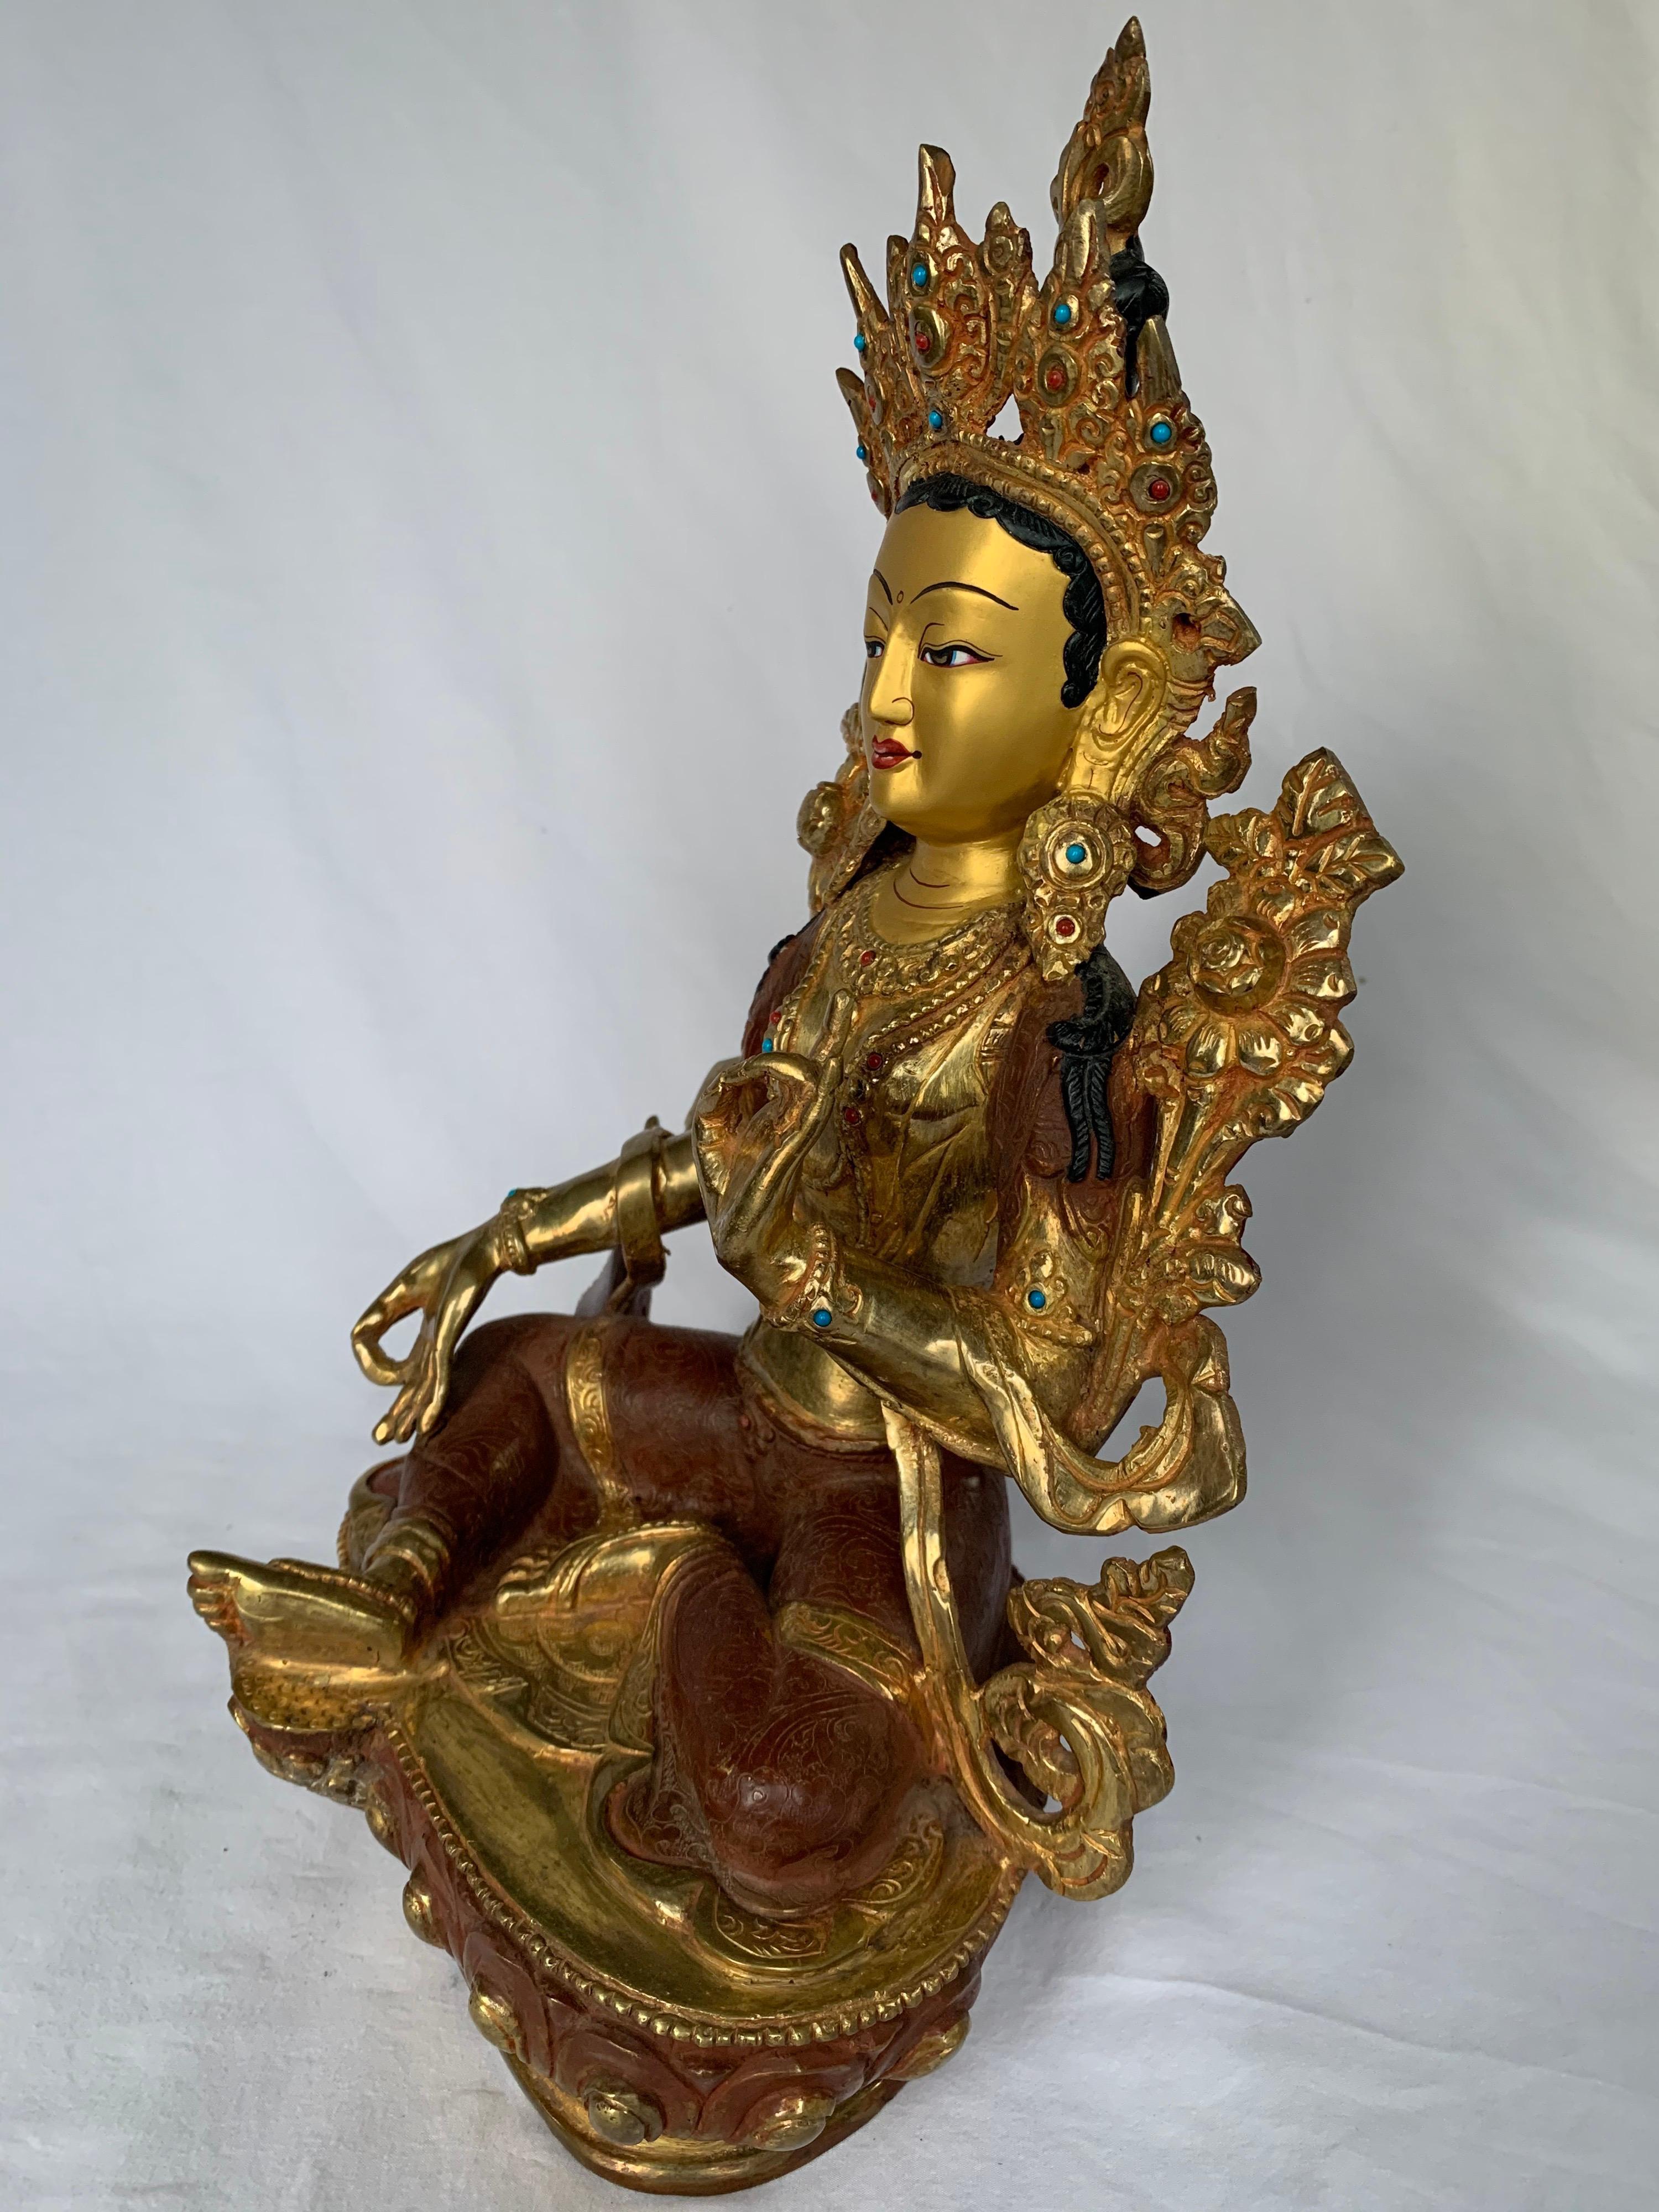 Green Tara Statue 12.5 Inch with 24K Gold Handcrafted by Lost Wax Process - Other Art Style Sculpture by Unknown